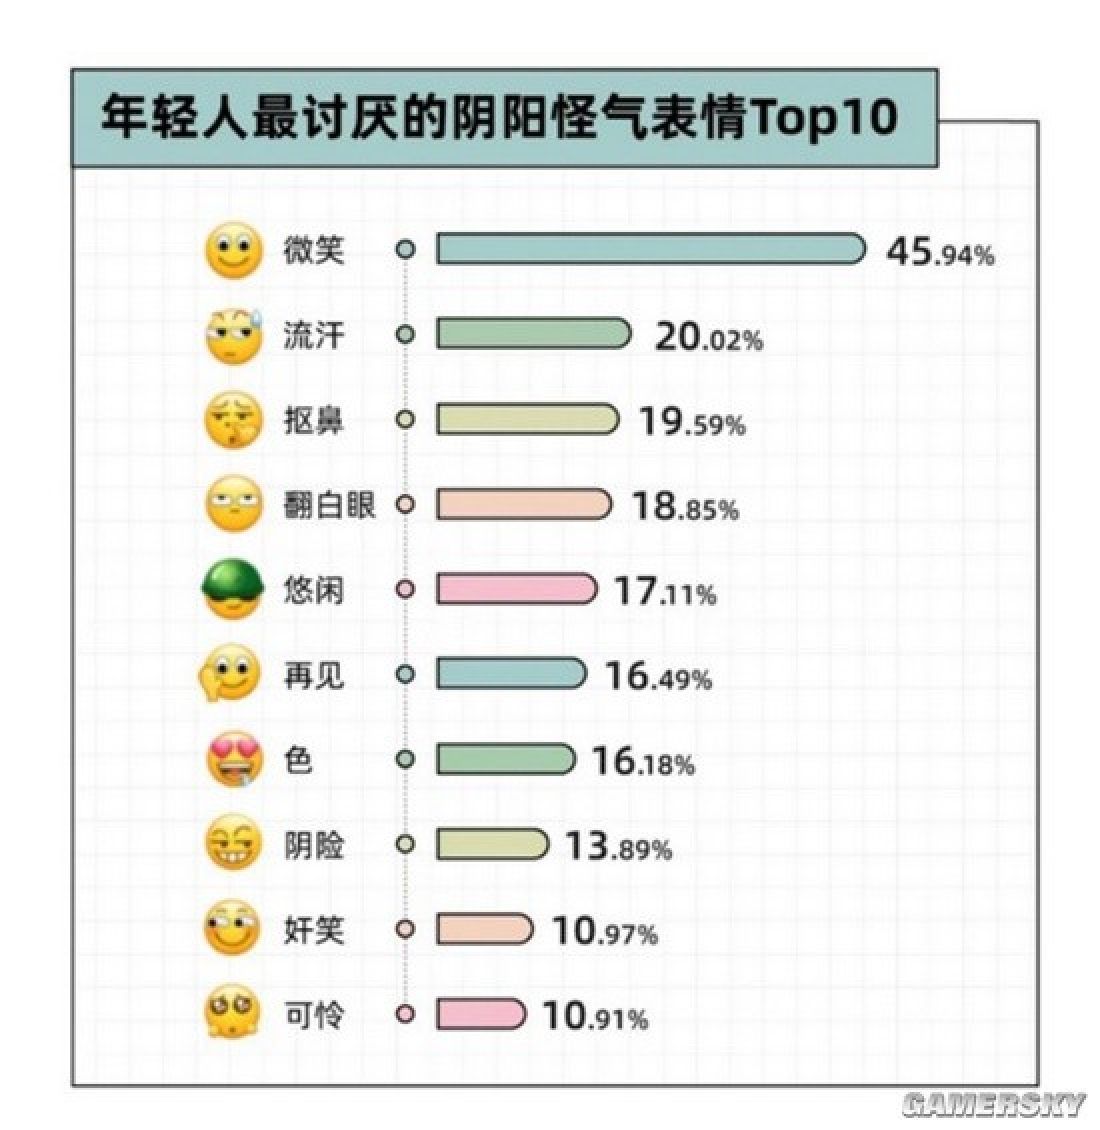 Just when you thought it was safe to send a simple smiley emoji, a survey comes along which says something completely different. Photo: Gamersky